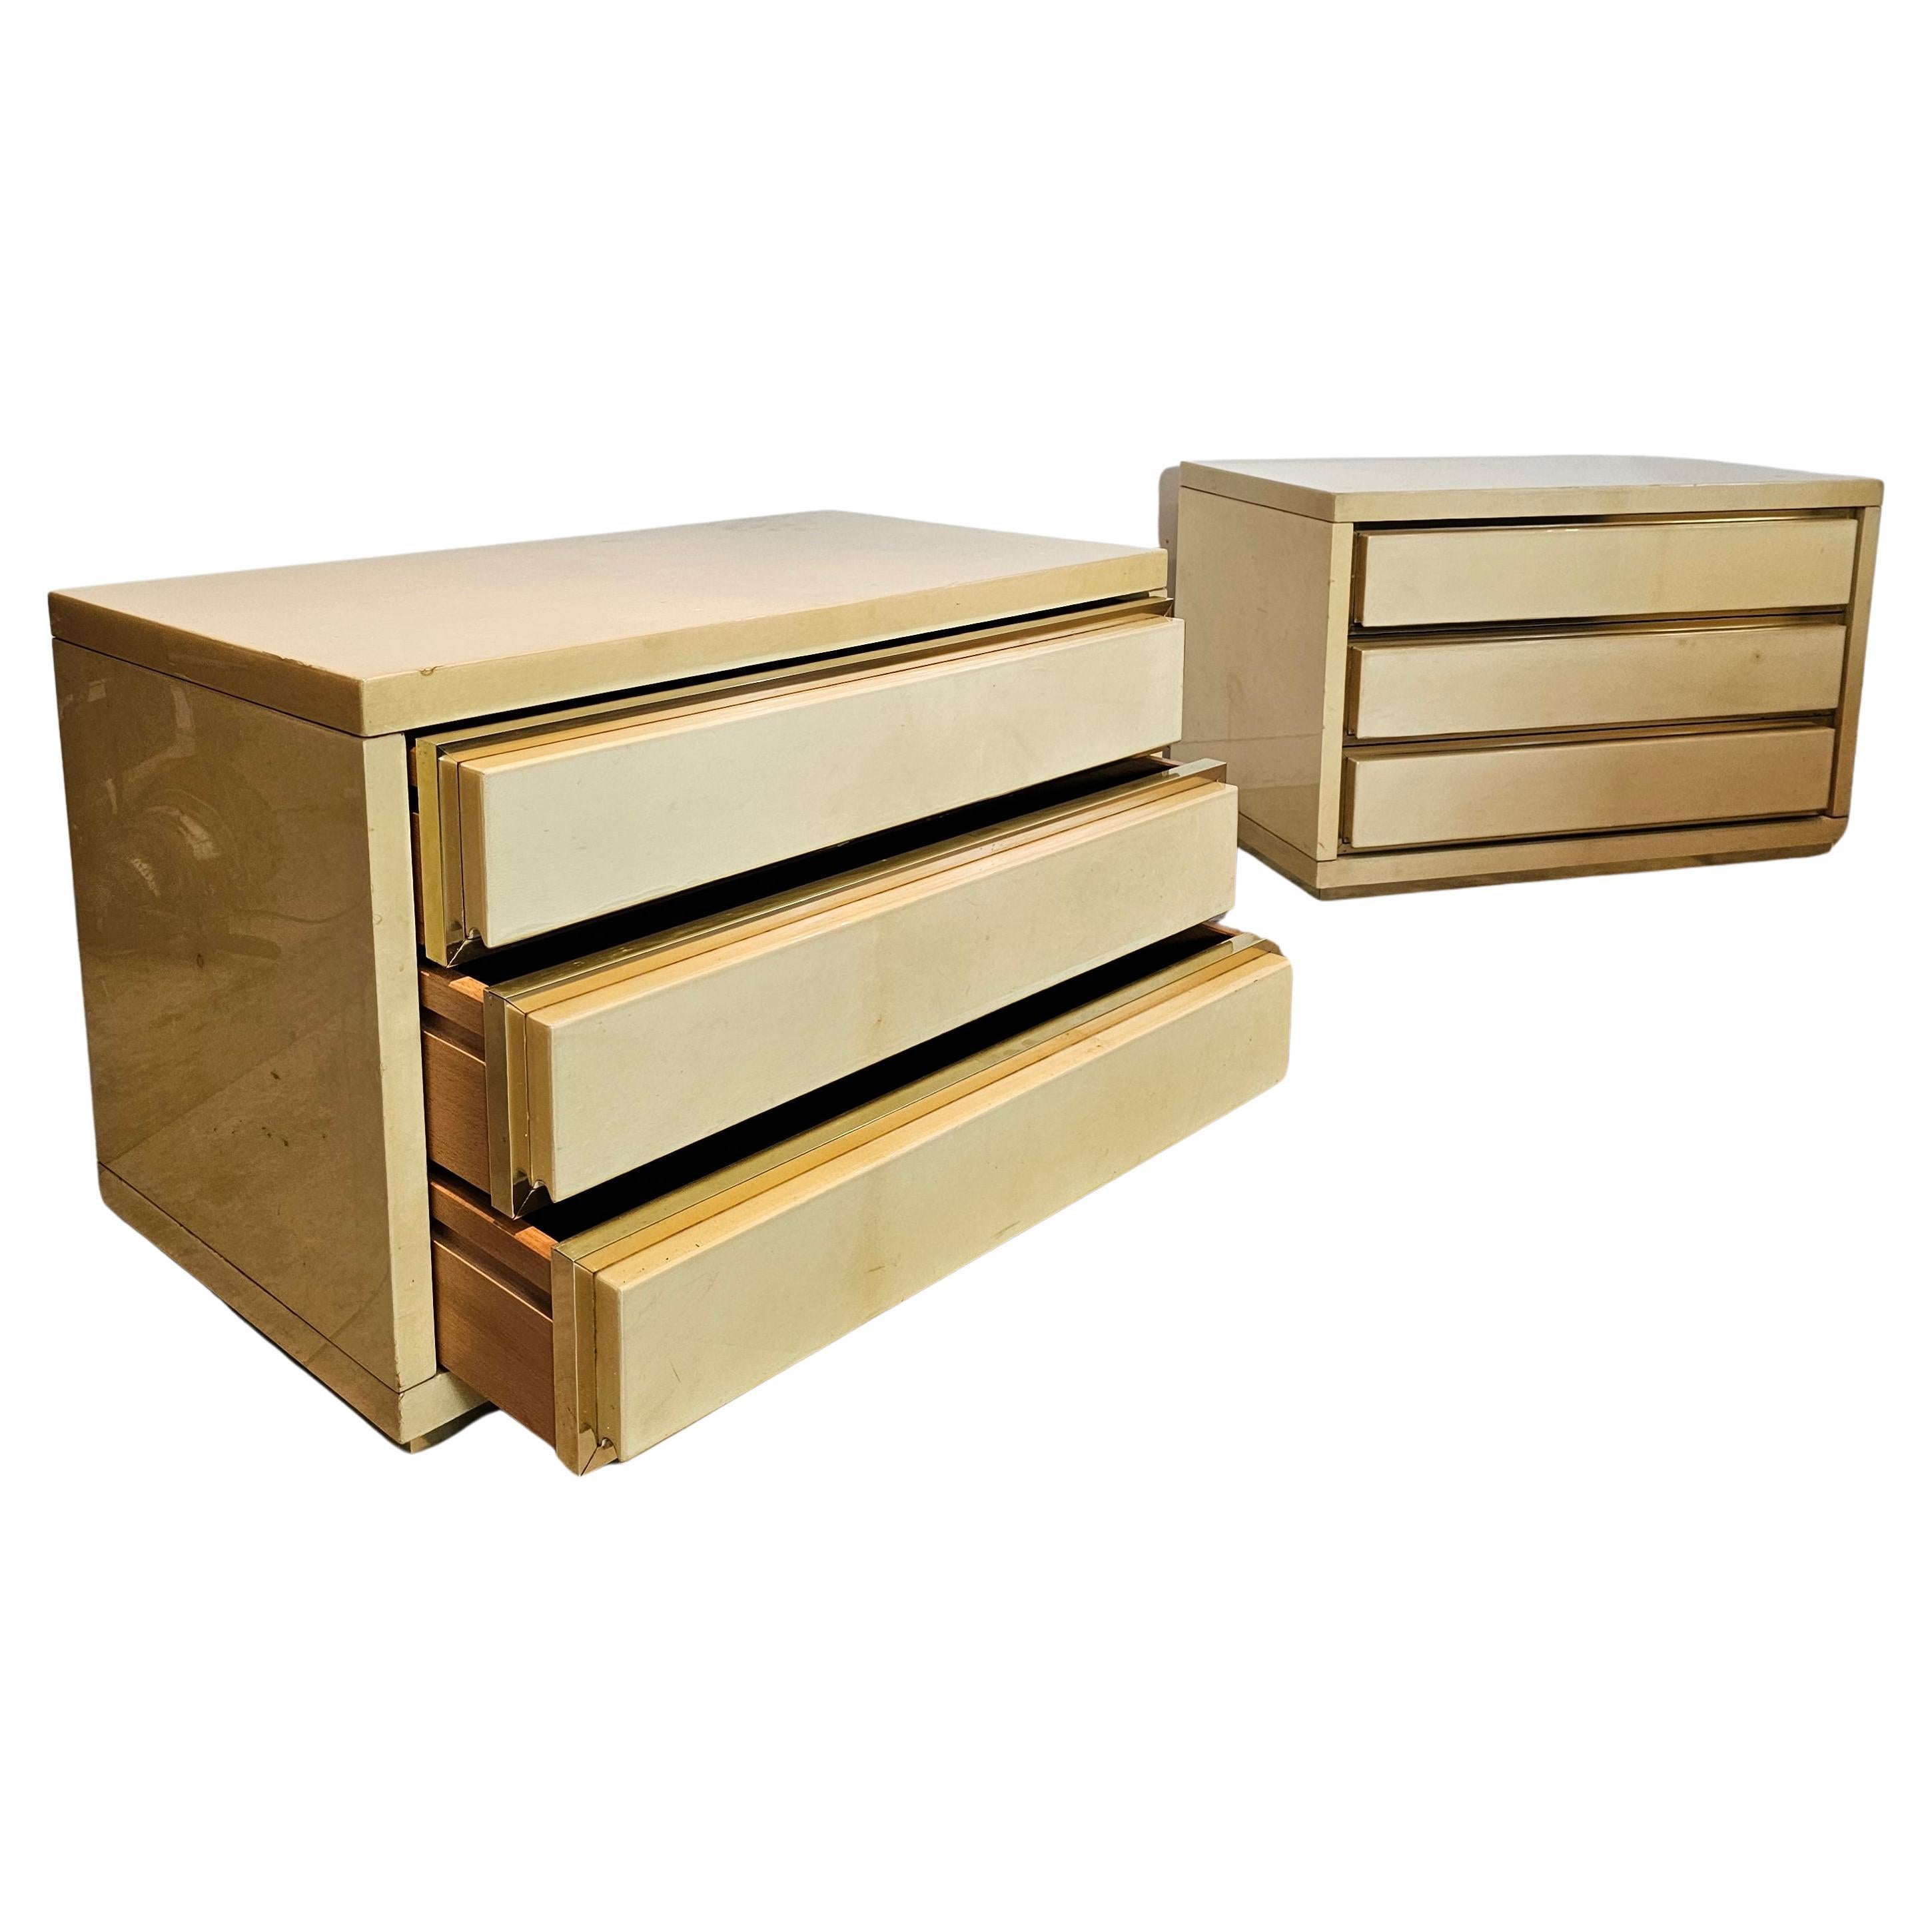 Pair of Bedsides in Ivory Color, from Aldo Tura, Italy 1970s